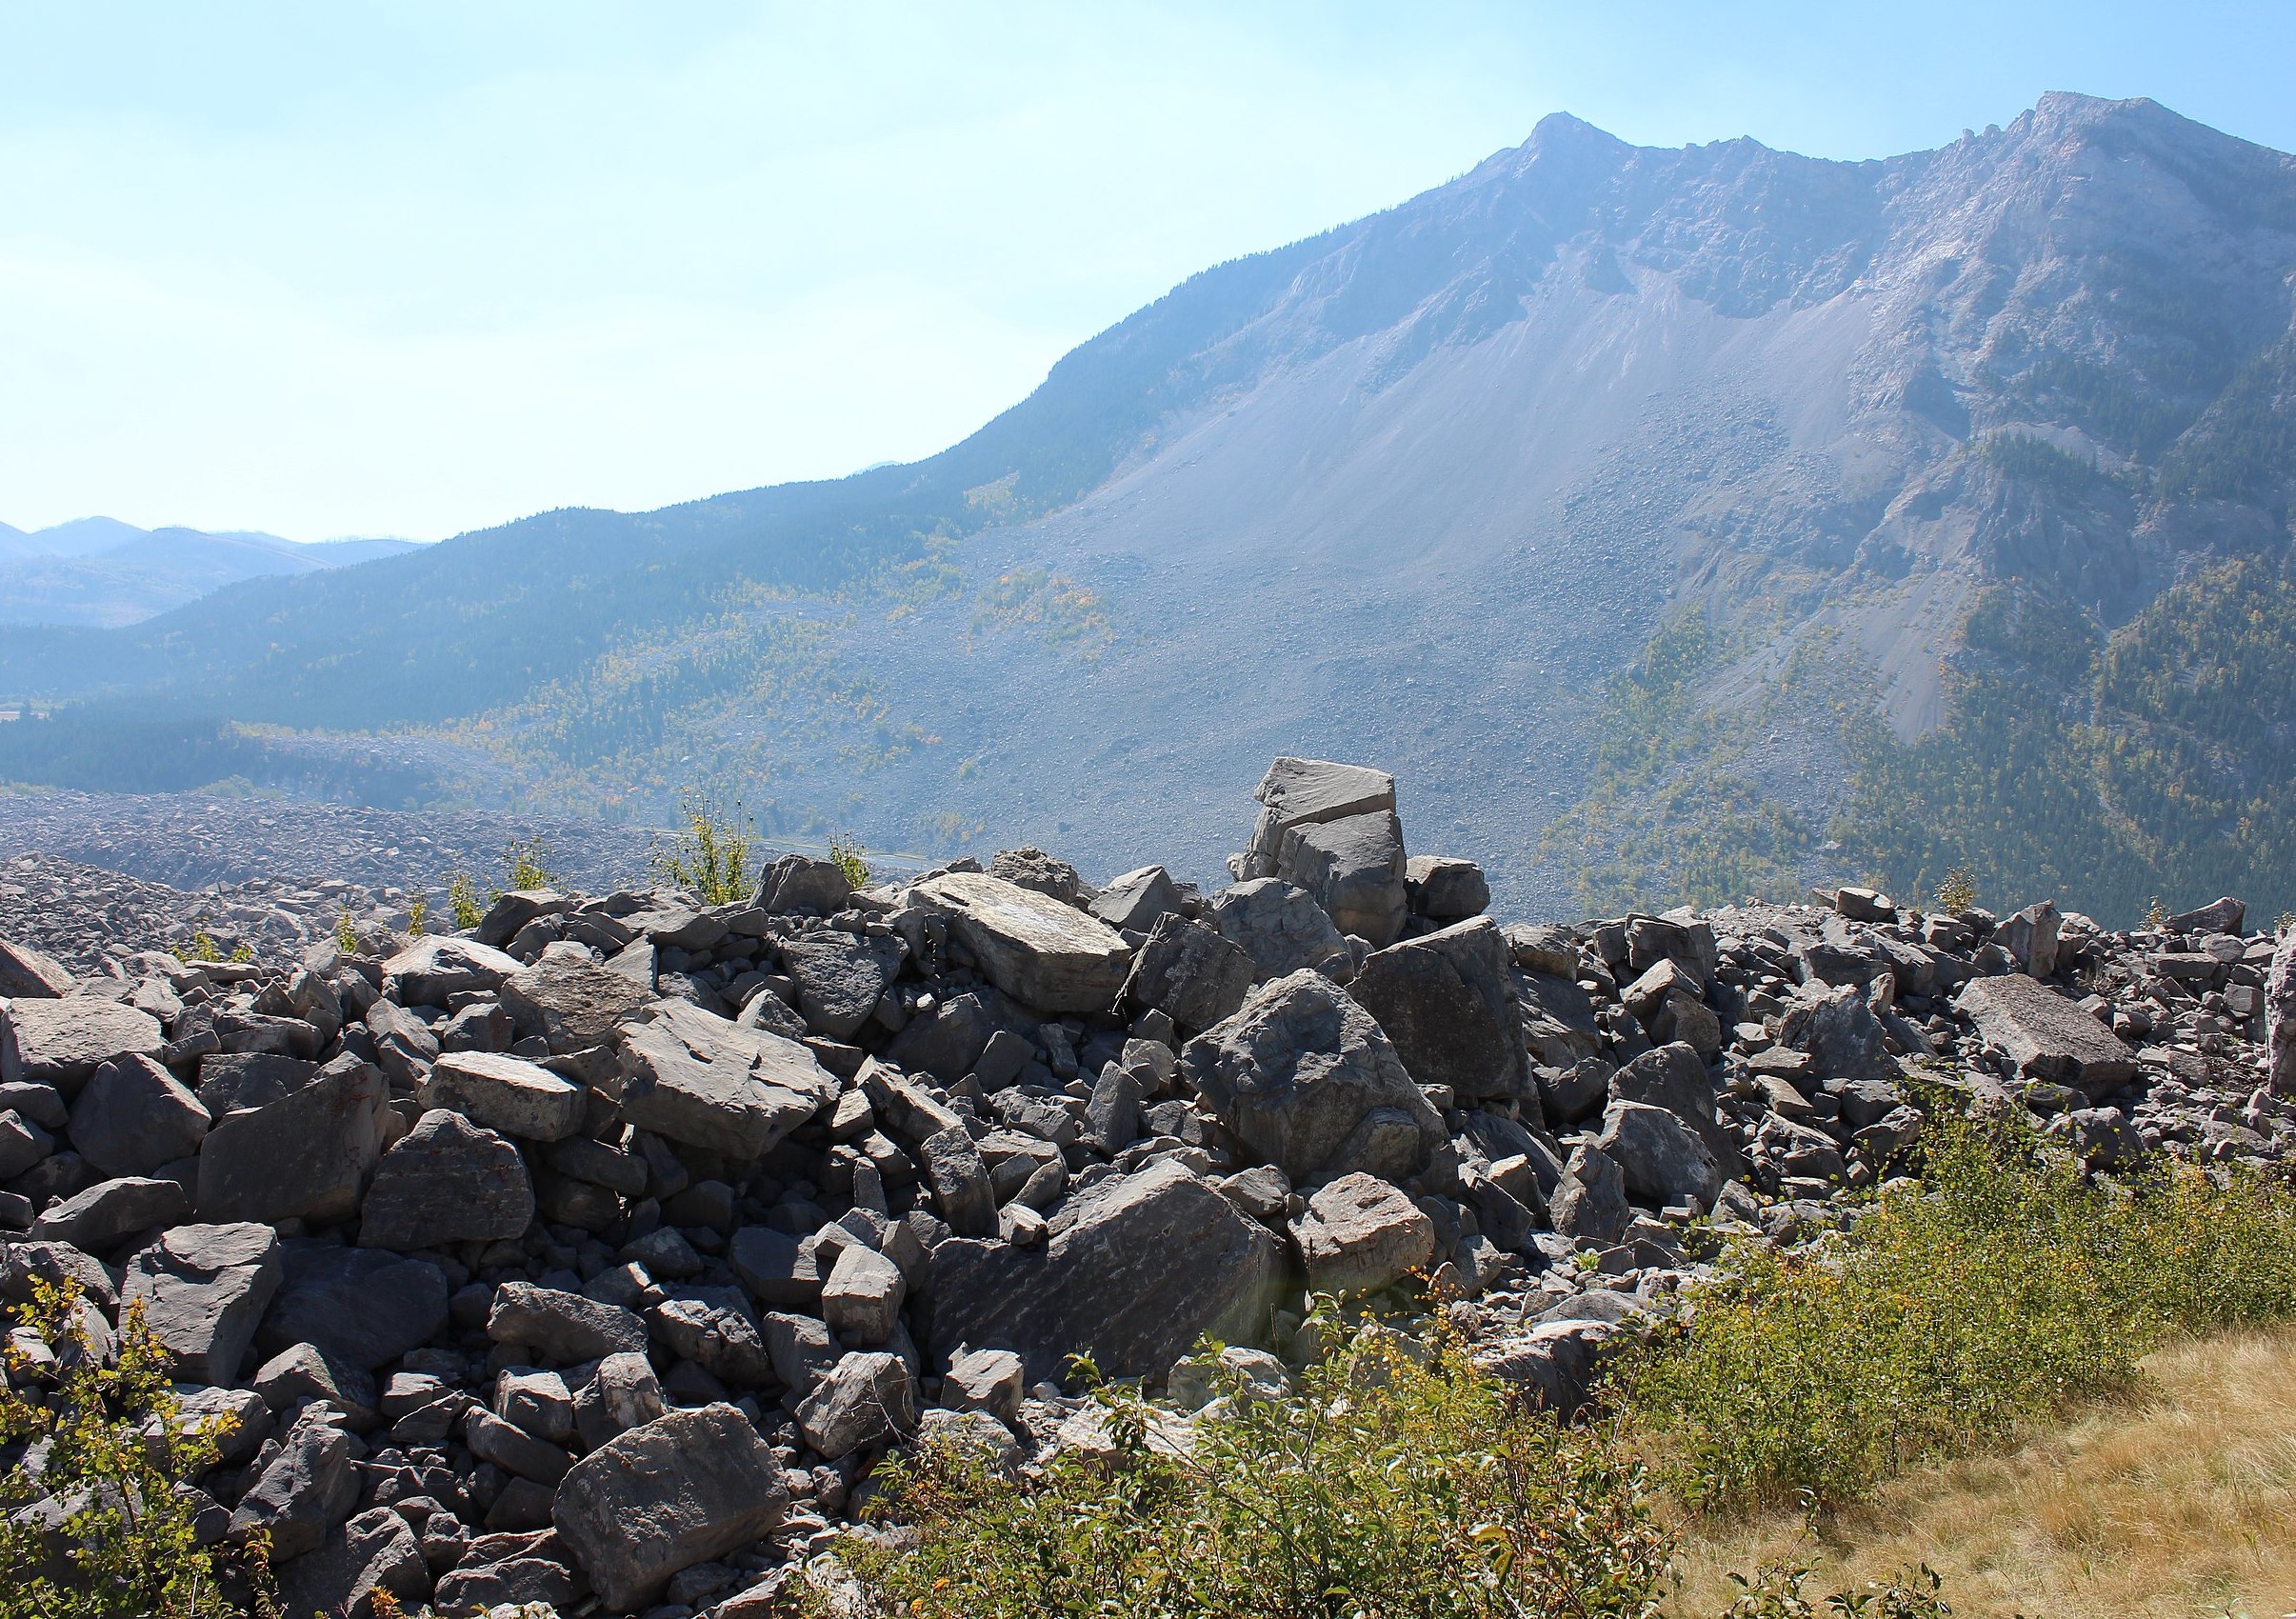 The foreground is filled with rubble. In the background a mountain is visible.